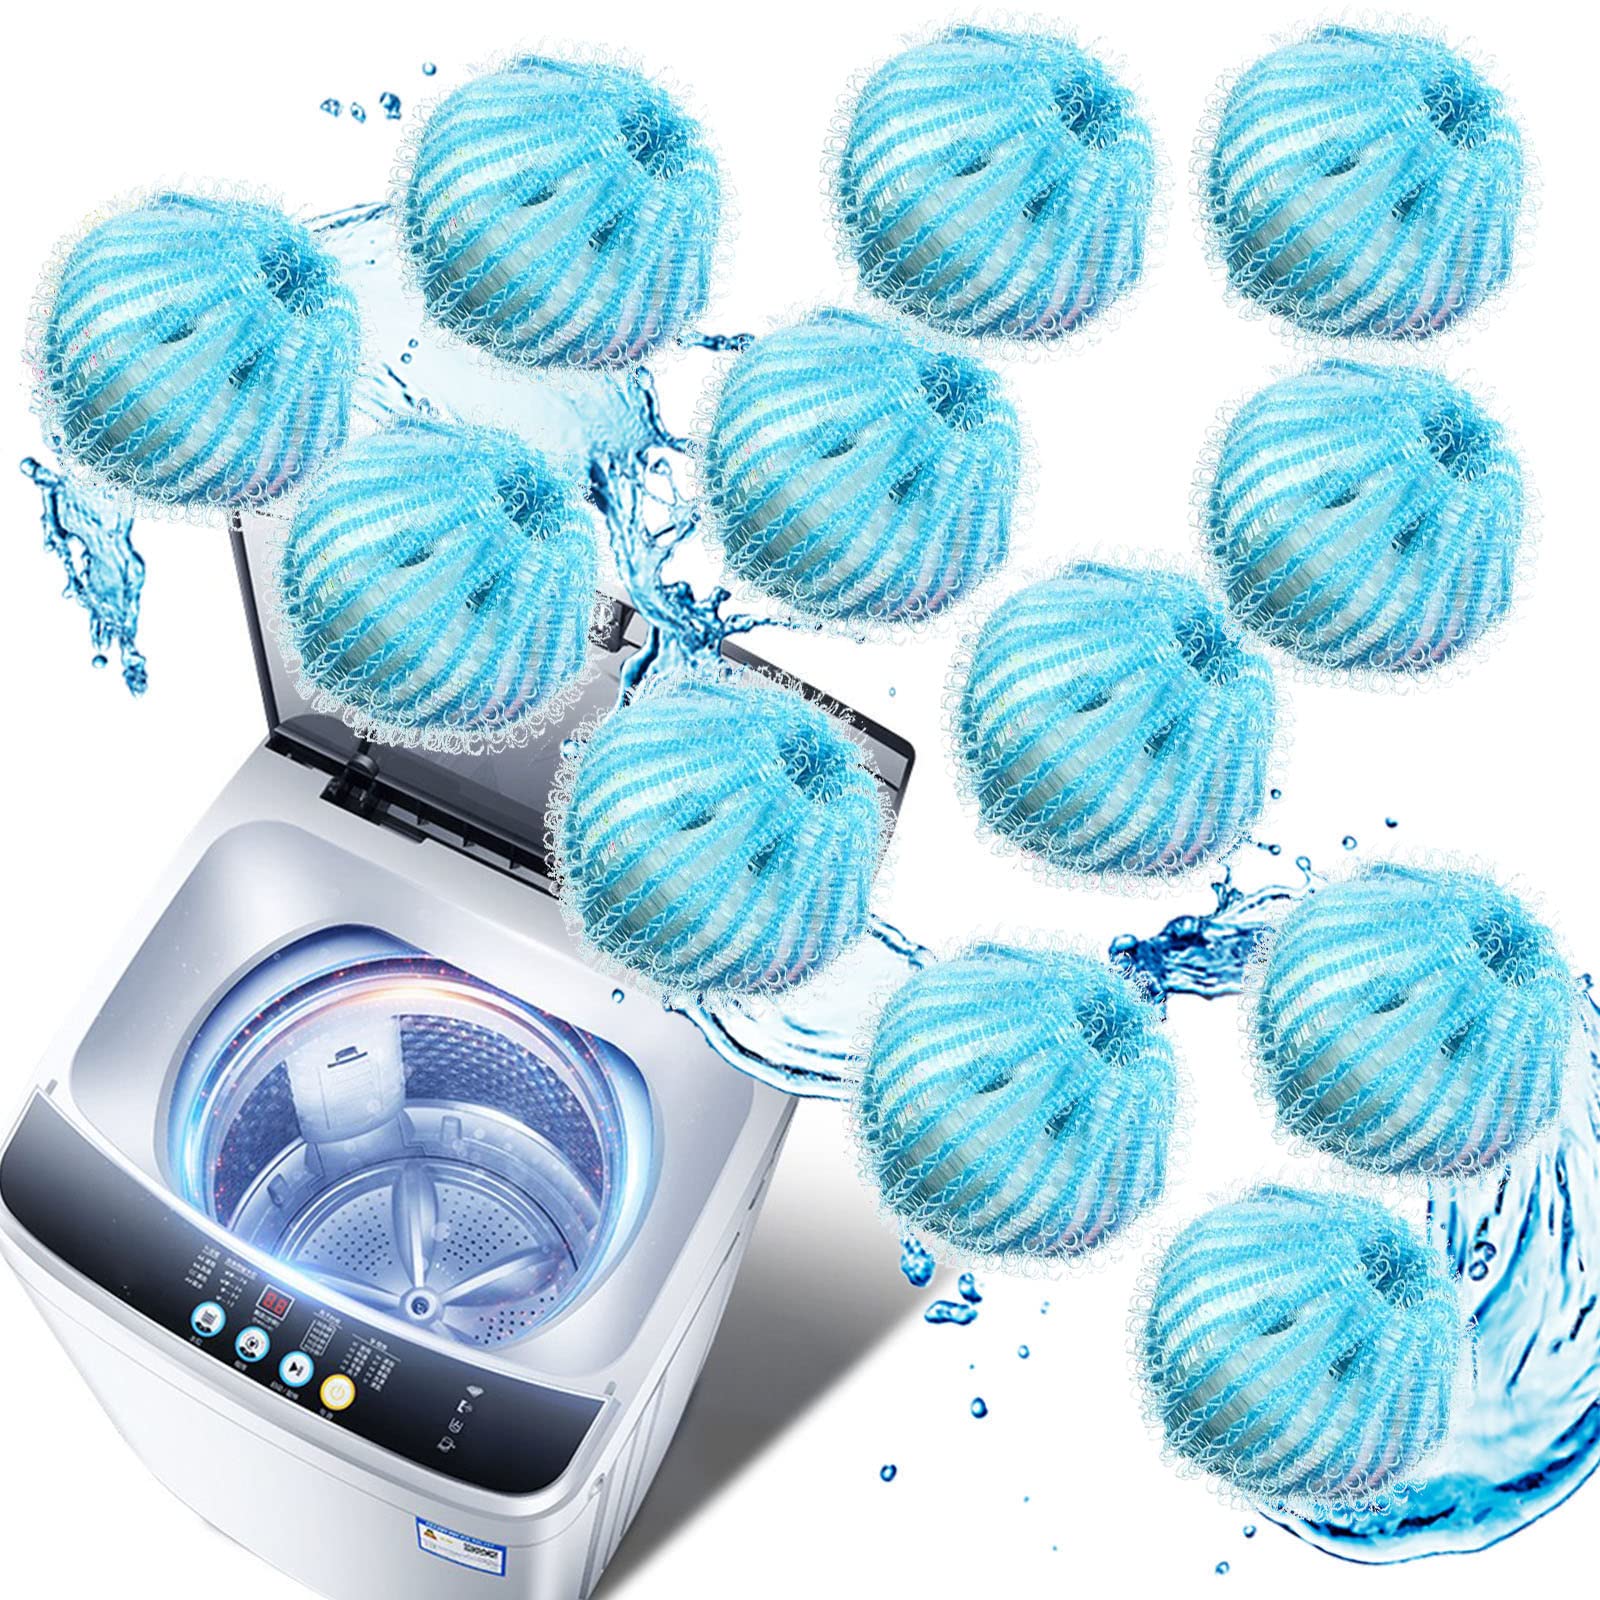 Pet Hair Remover Ball For Laundry, Reusable Laundry Lint Remover